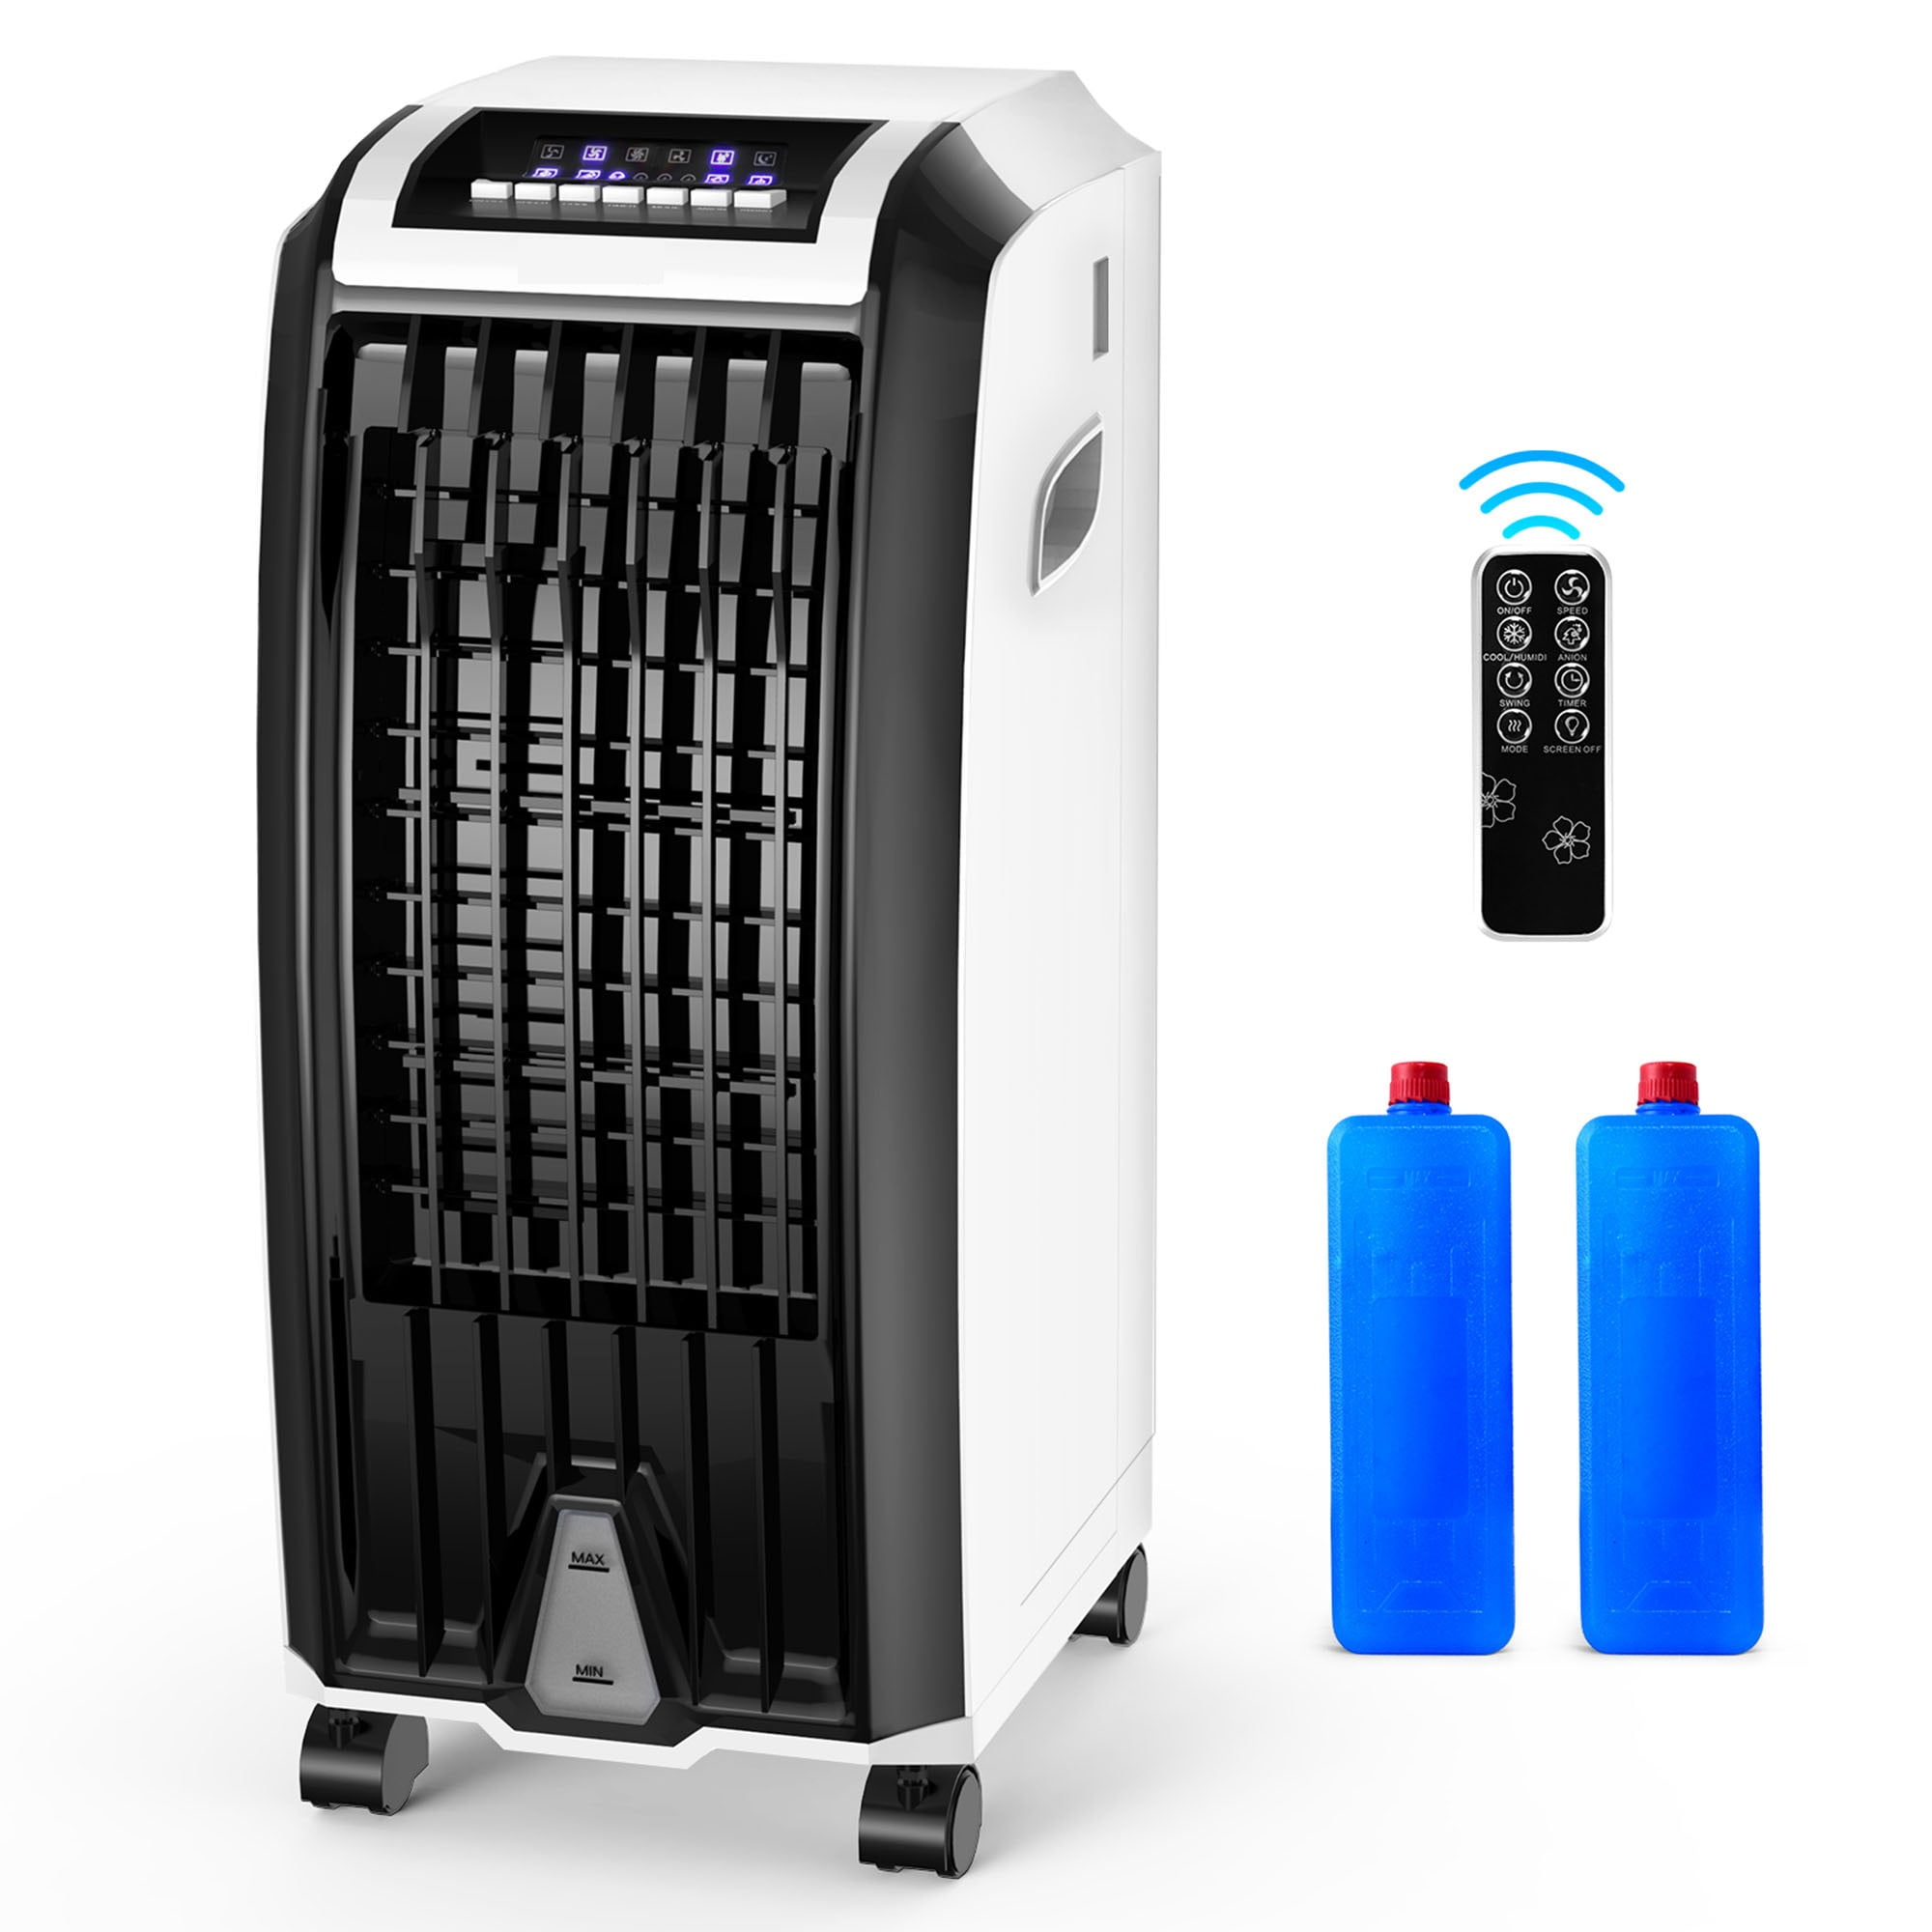 Purification 2 Adjustable Speeds and 7 LED Lights for Home and Office Humidifier OOOUSE Portable Air Cooler Noiseless Evaporative Cooler with Water Tank 3 in 1 Mobile Air Conditioner Fan